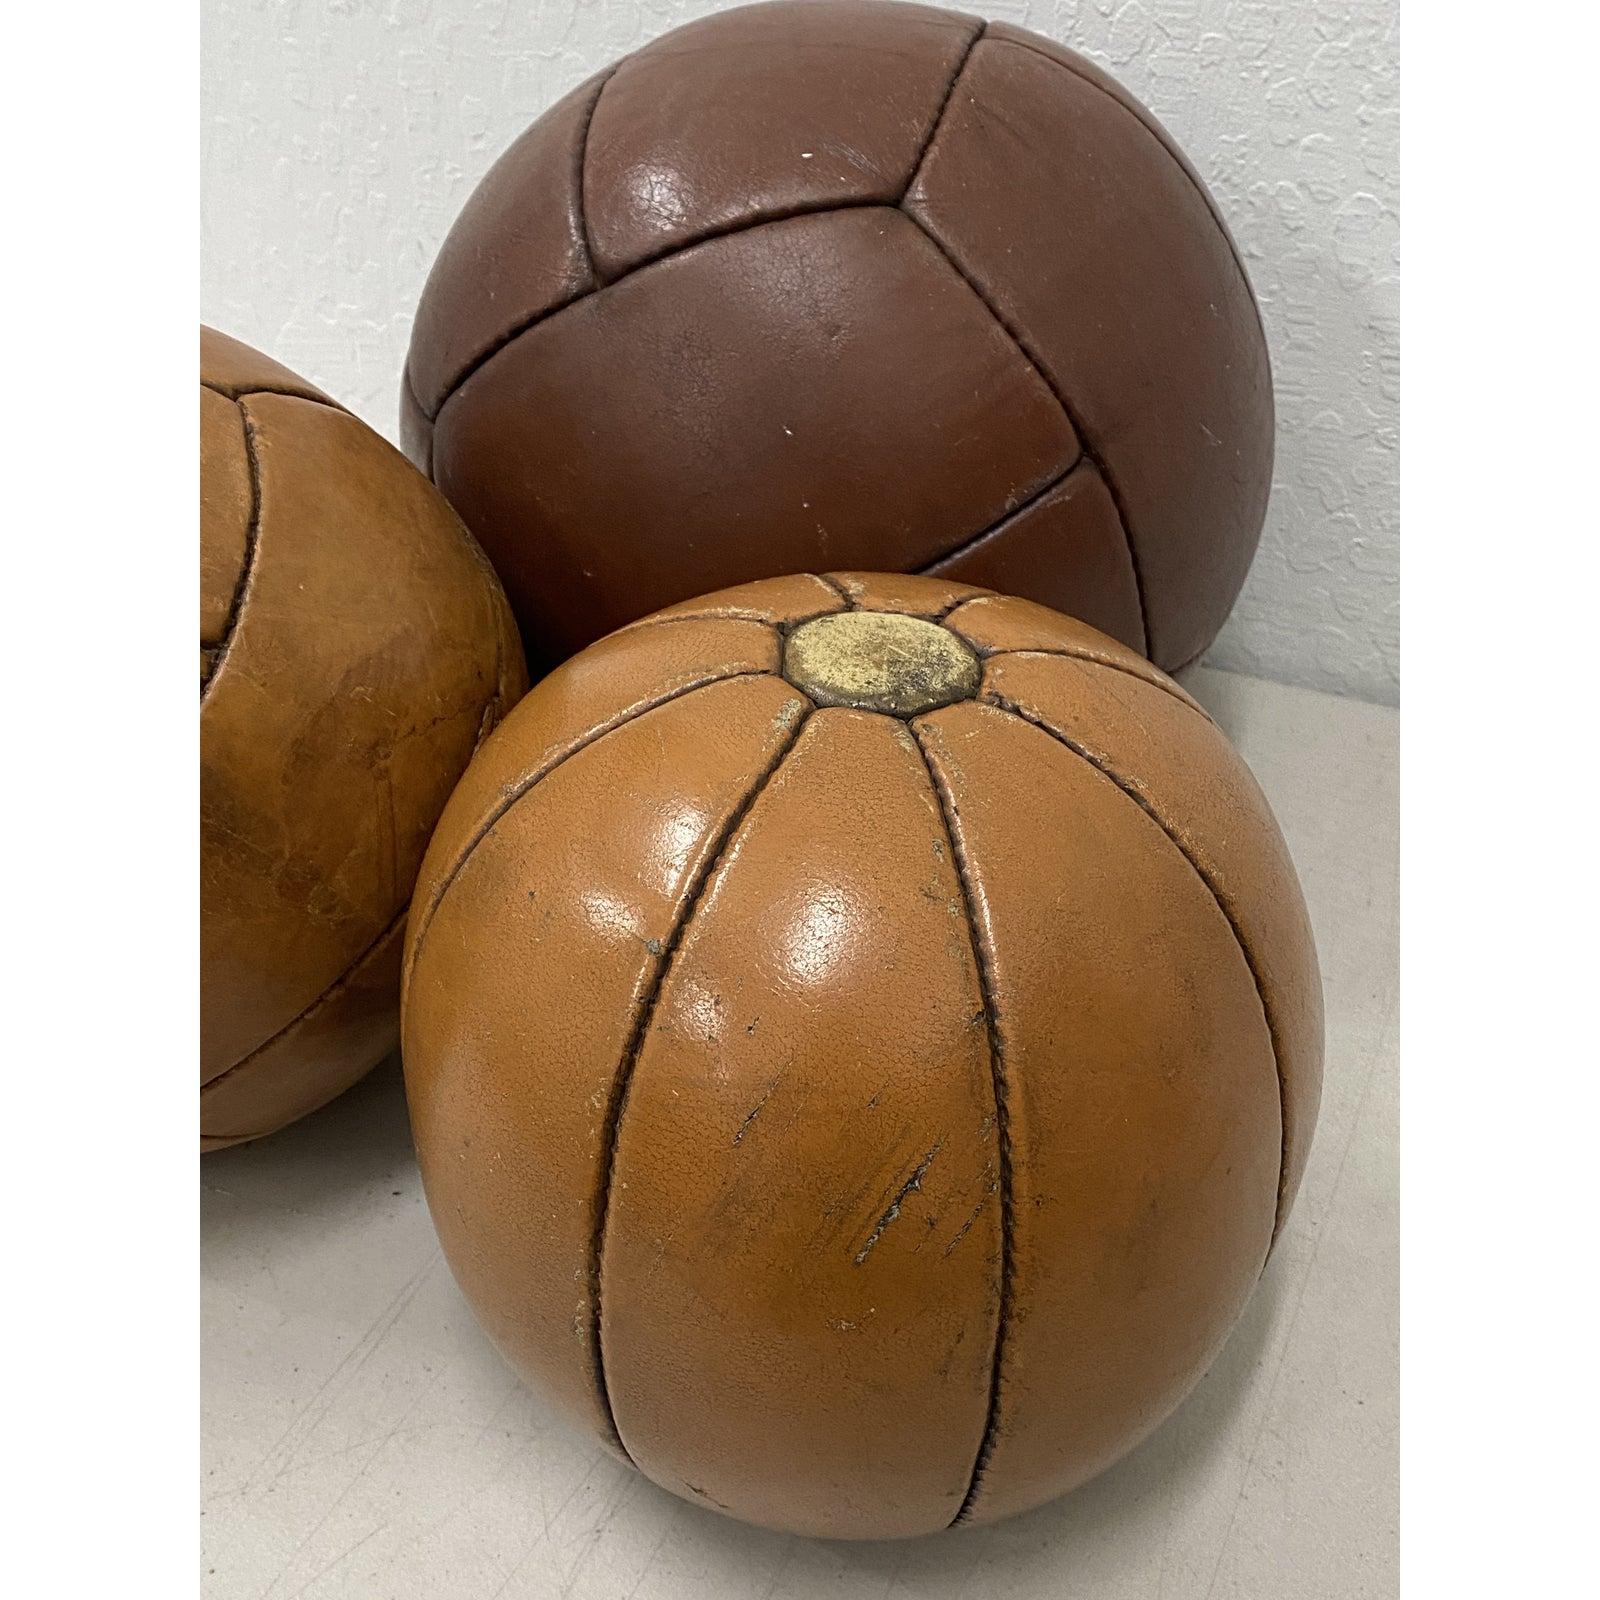 Set of three vintage leather medicine balls, circa 1940

Great collection of old school medicine balls.

Hippocrates is said to have stuffed animal skins for patients to toss for 